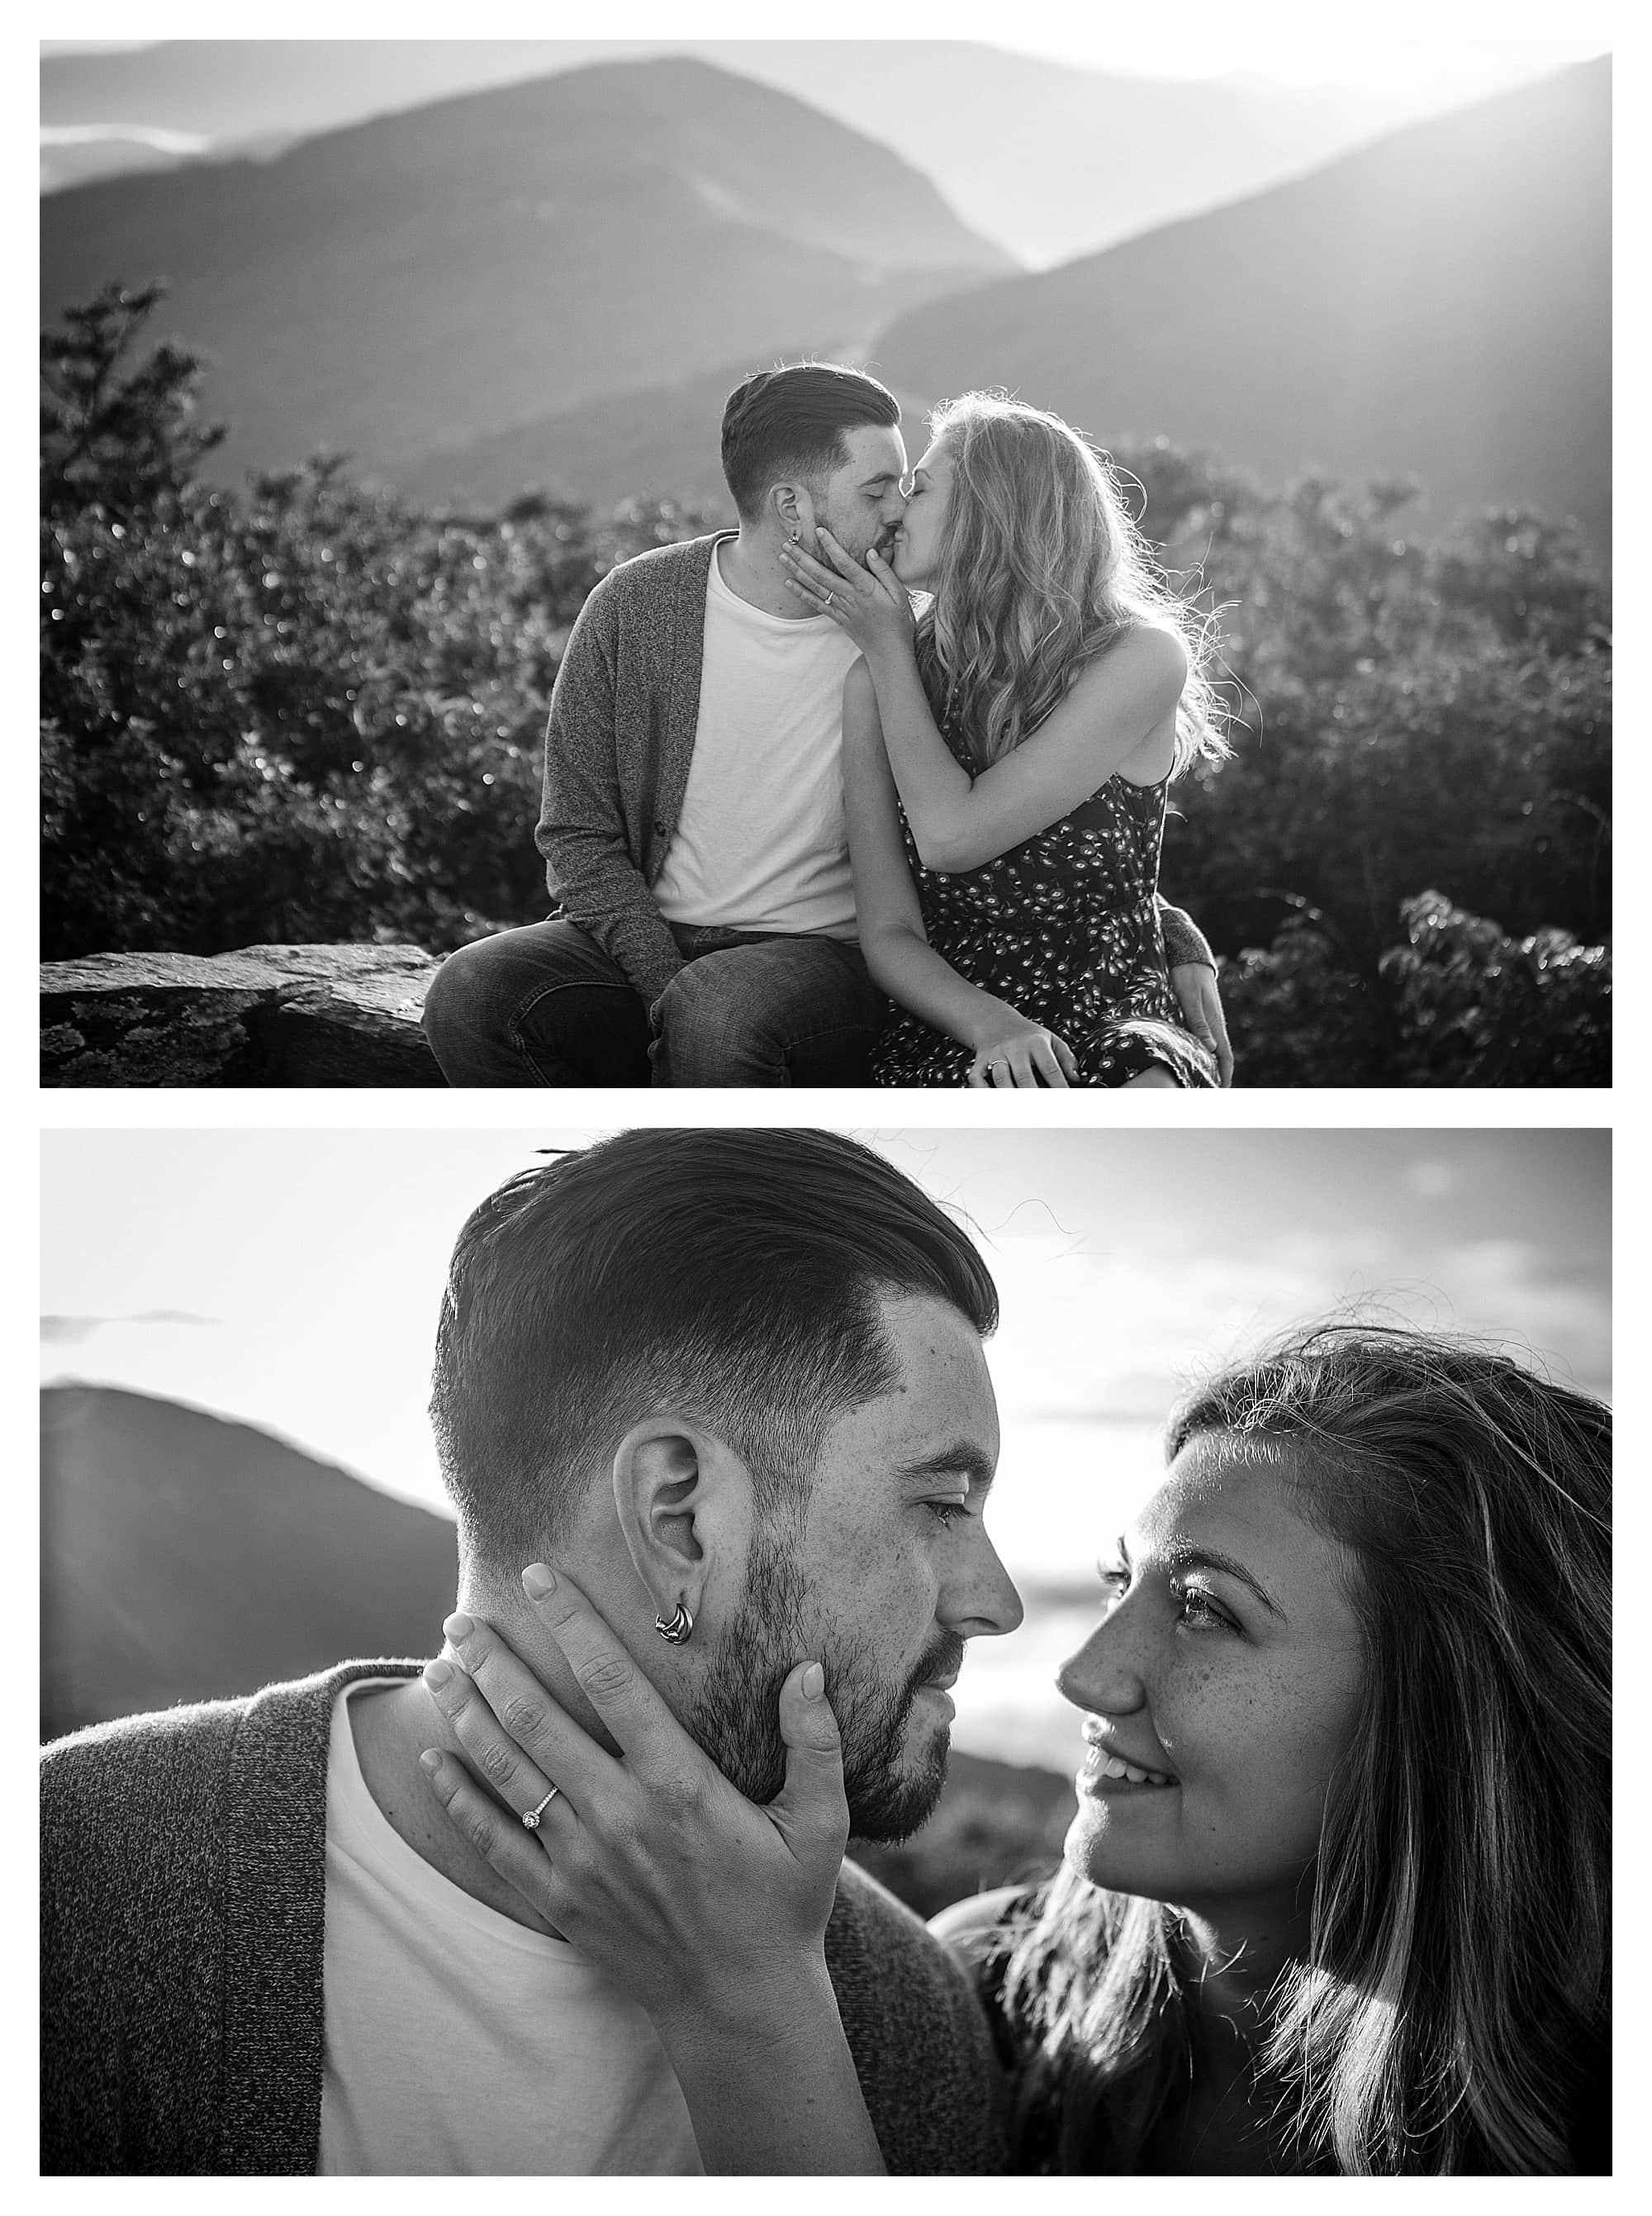 Black and white phots of engaged couple kissing while sitting on brick wall with mountains in background